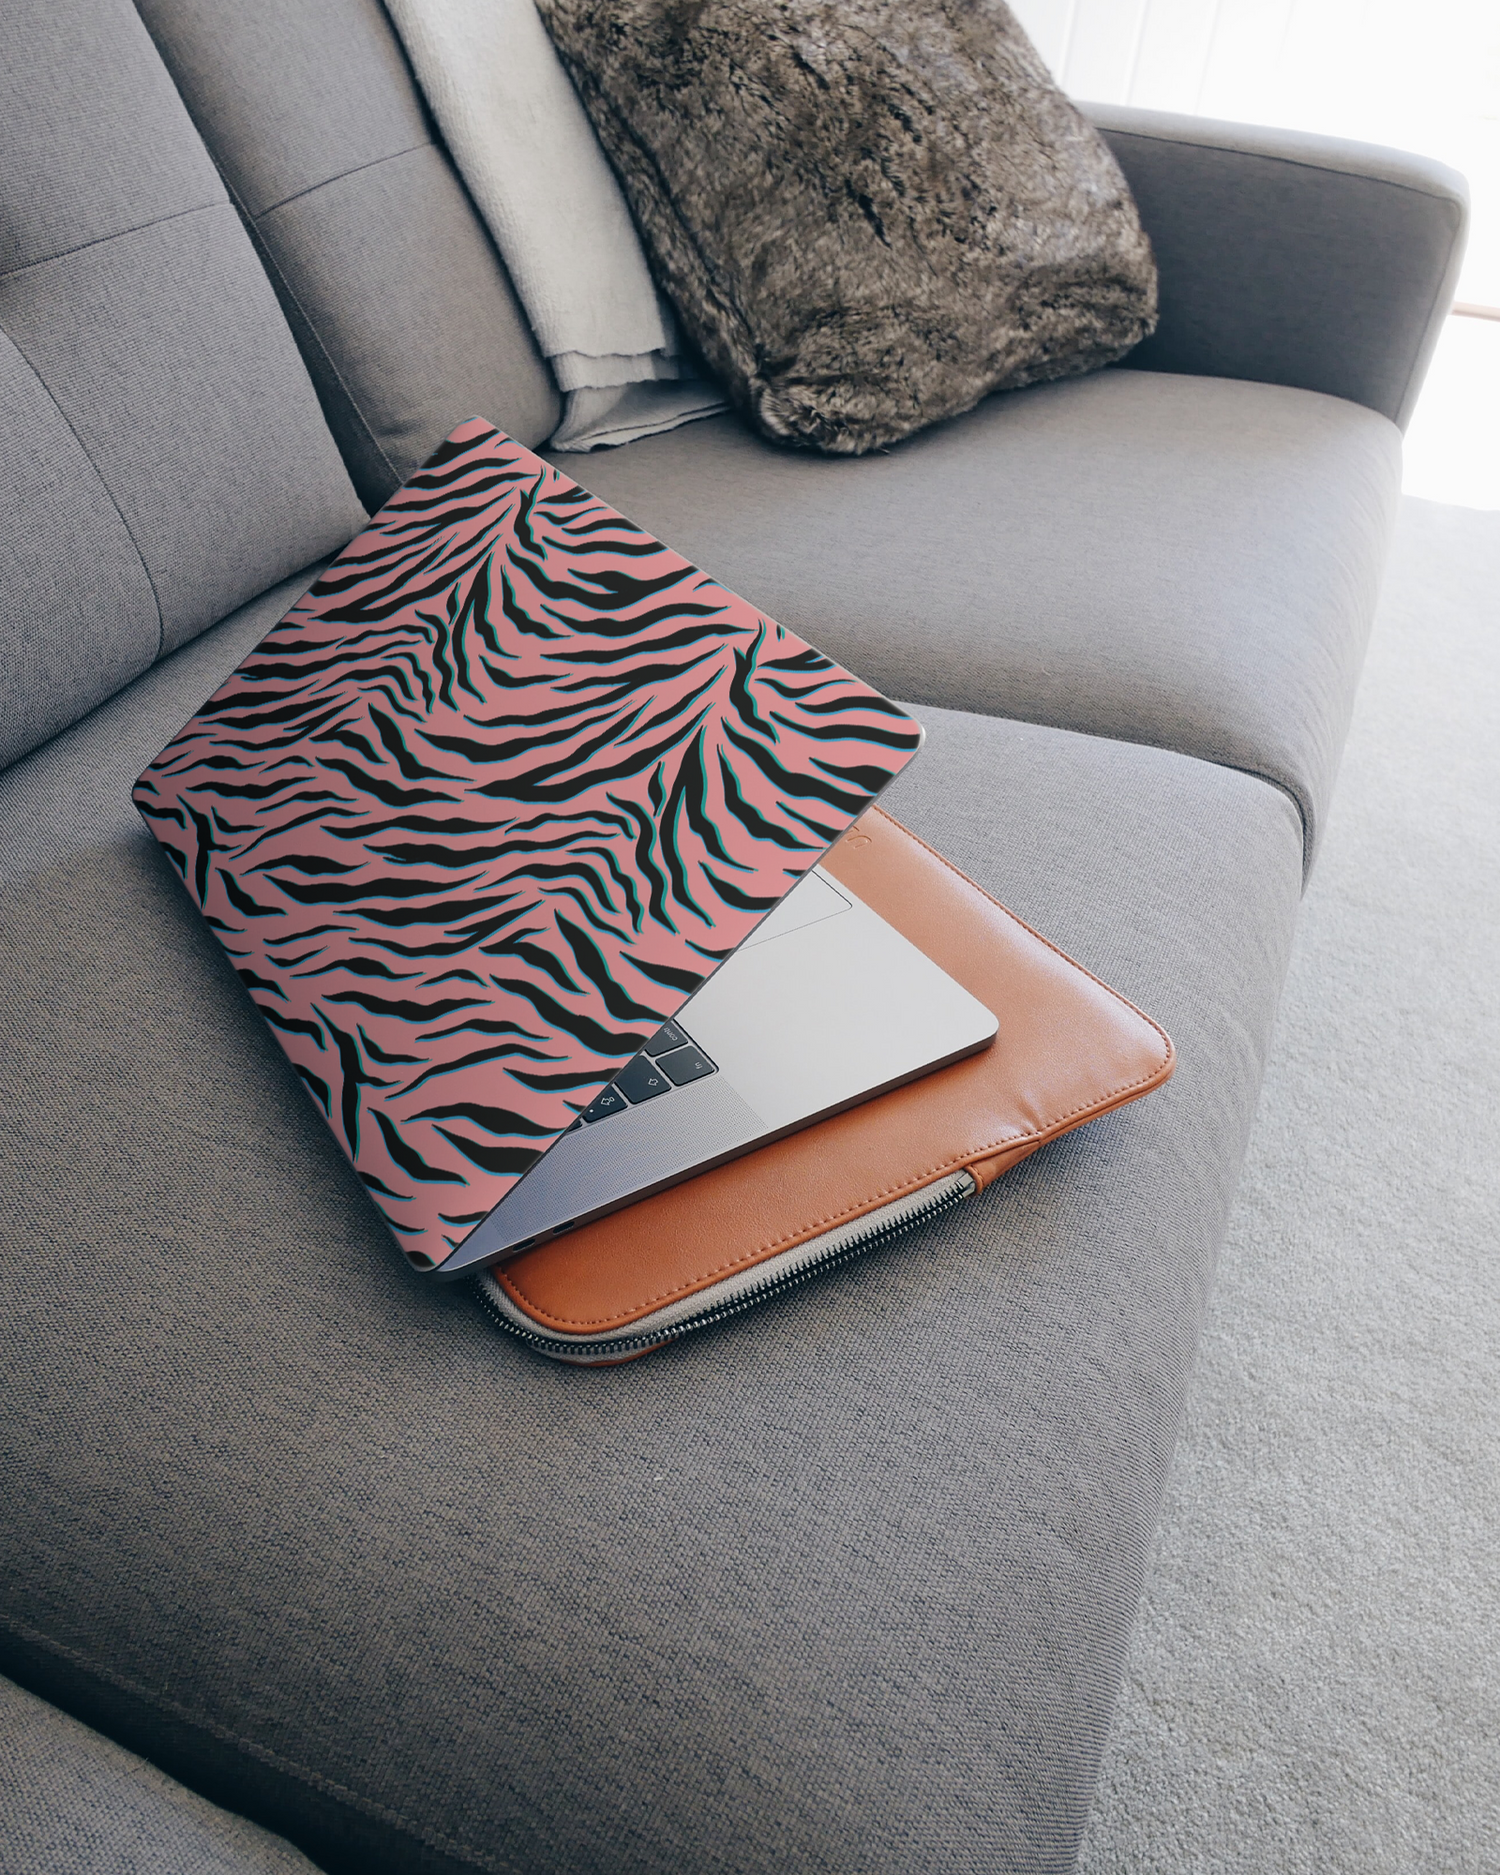 Pink Zebra Laptop Skin for 15 inch Apple MacBooks on a couch